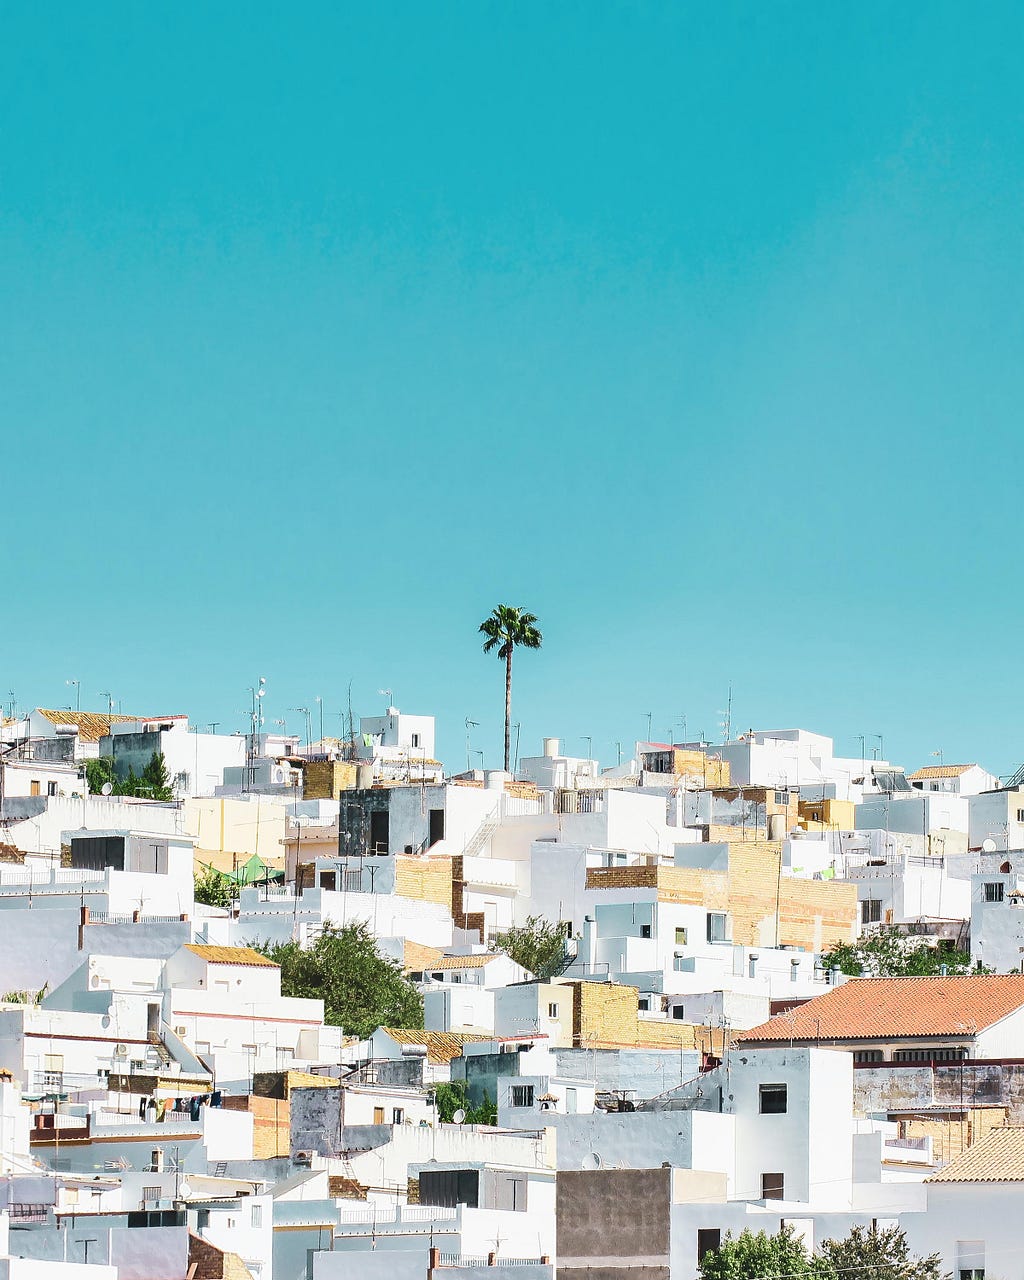 The skyline of a Spanish city with white adobe houses and palm trees.